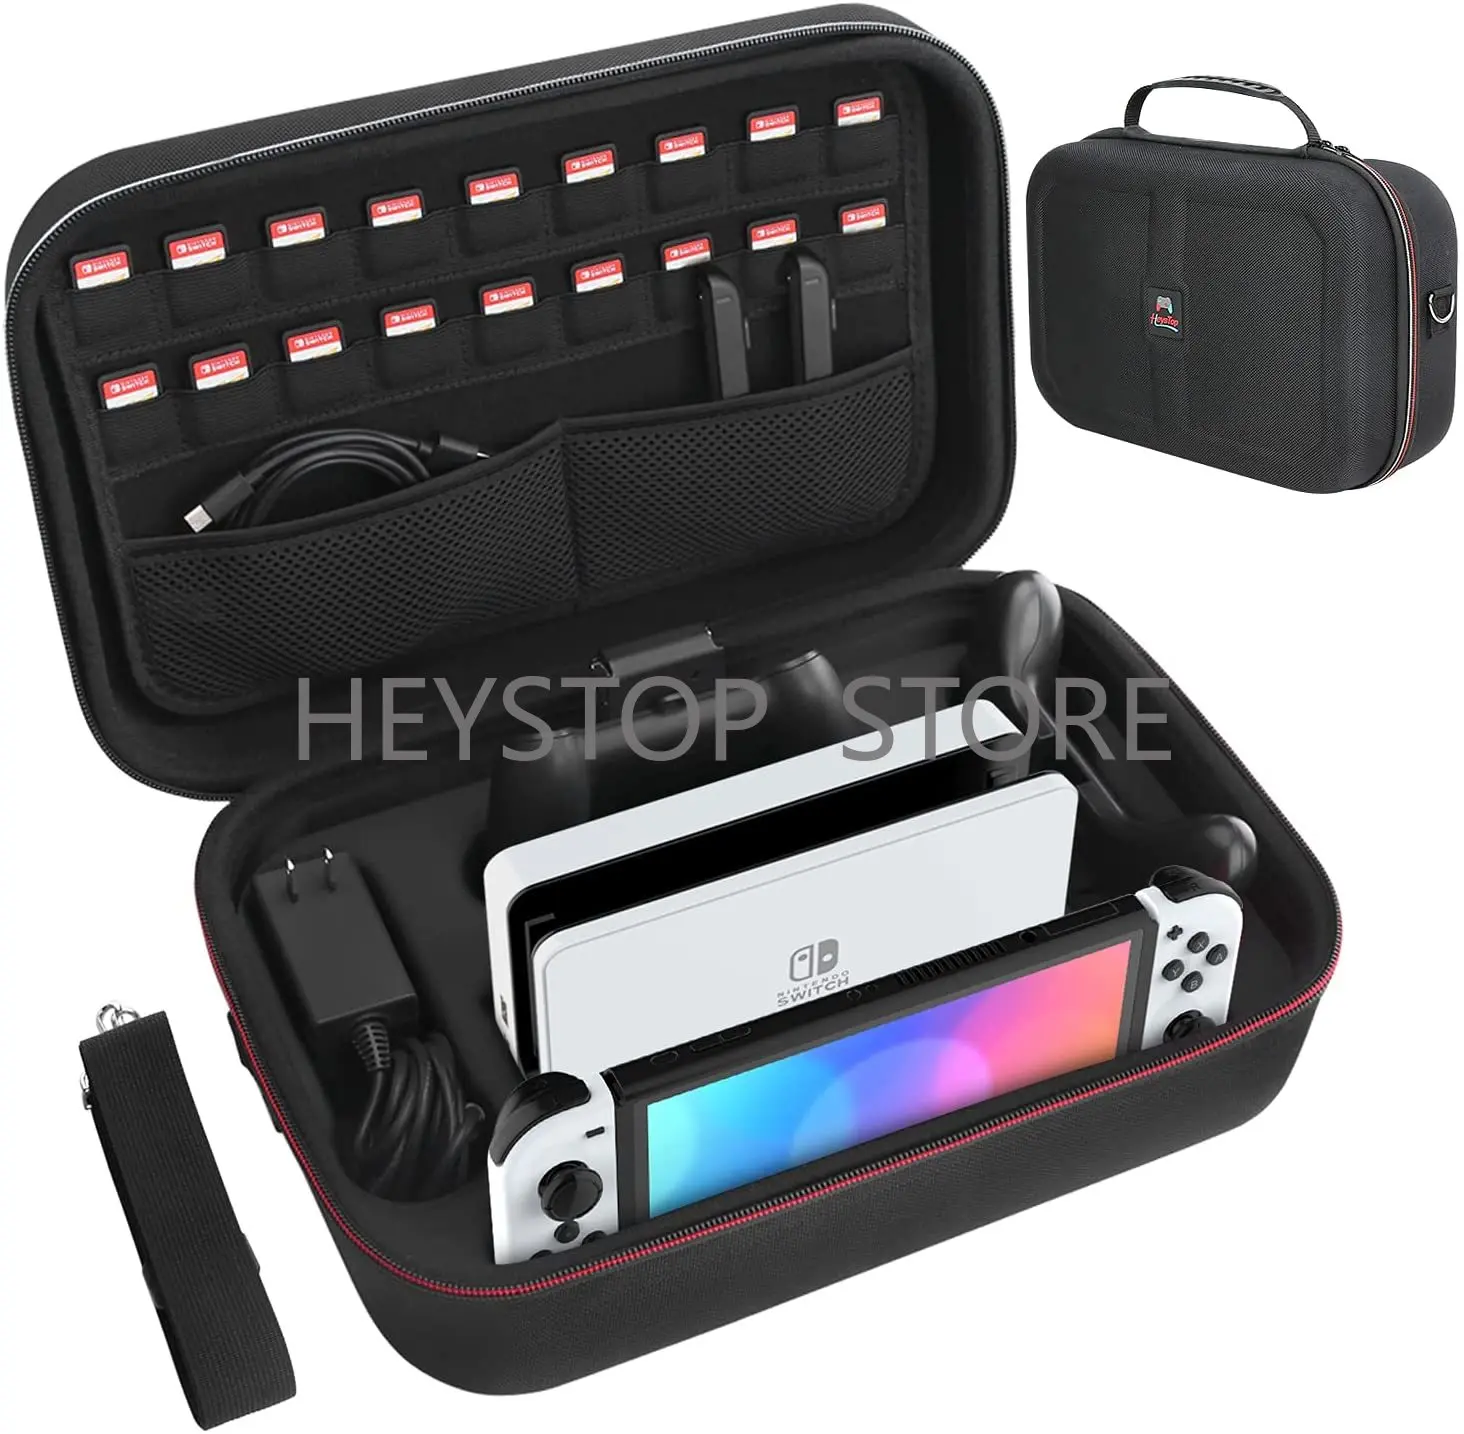 Heystop Carrying Storage Case Compatible With Nintendo Switch/switch Oled Model, Case With Protective Travel Carrying Bag - Bags AliExpress